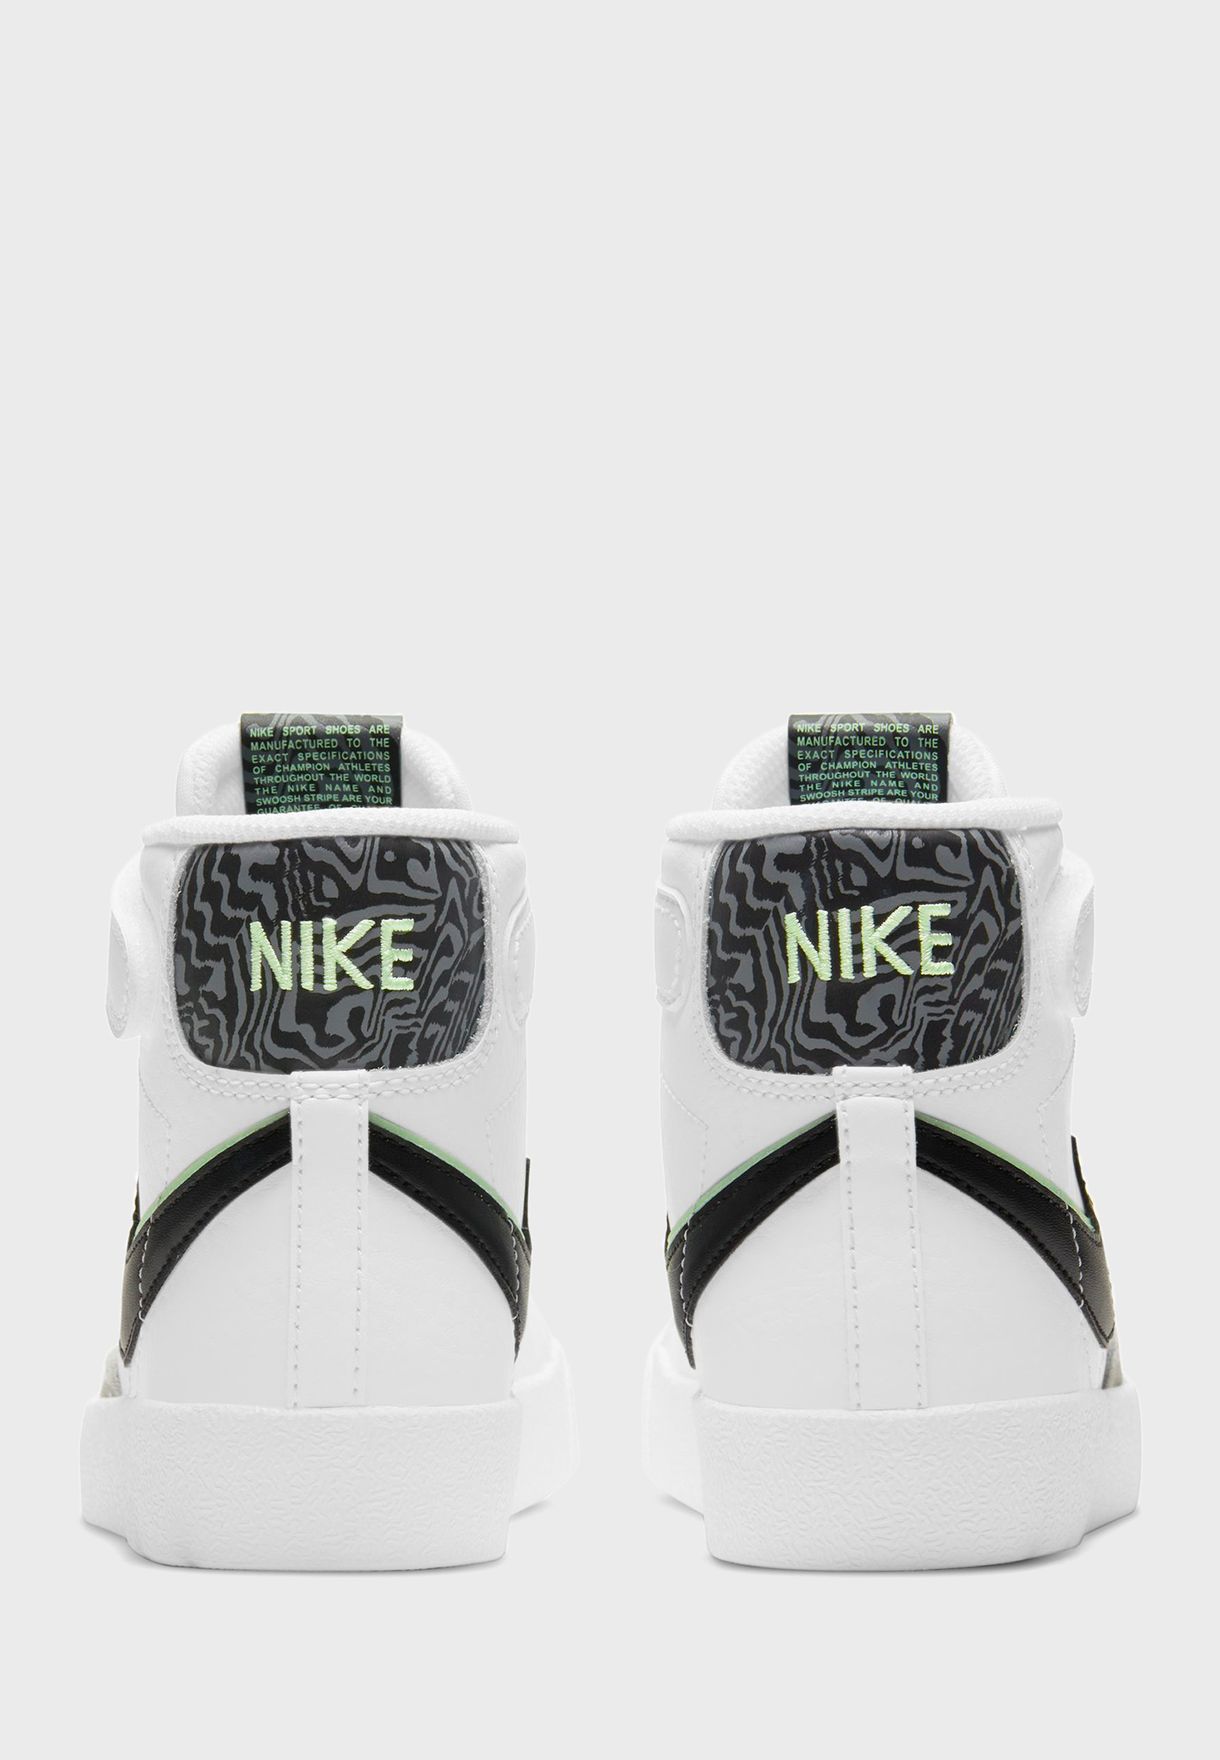 nike sport shoes are manufactured to the exact specifications